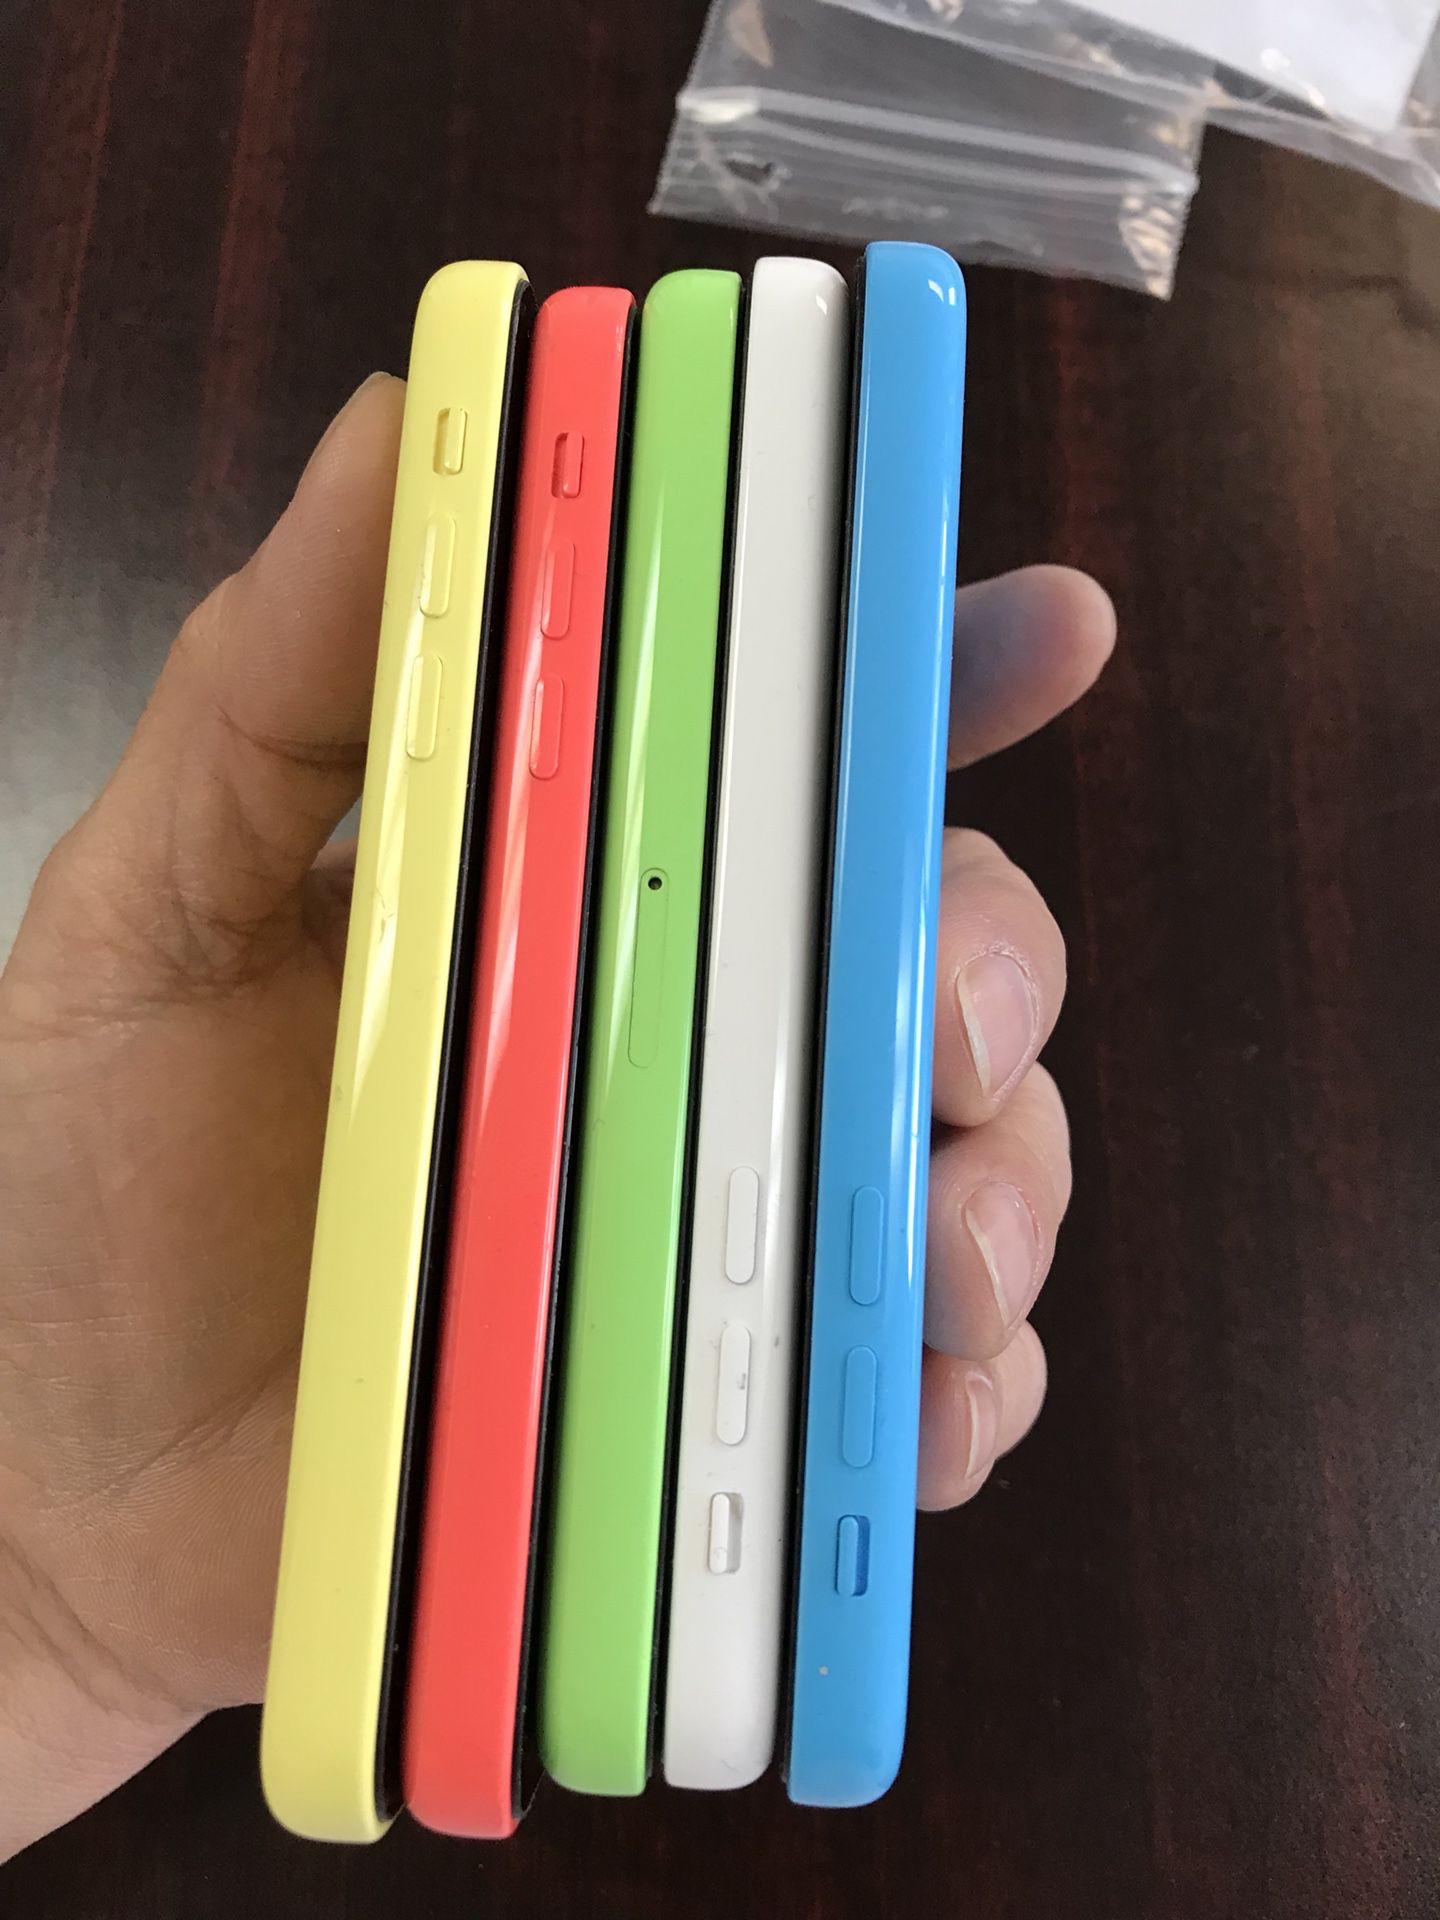 Unlocked IPhone 5c 8gb $80 for each